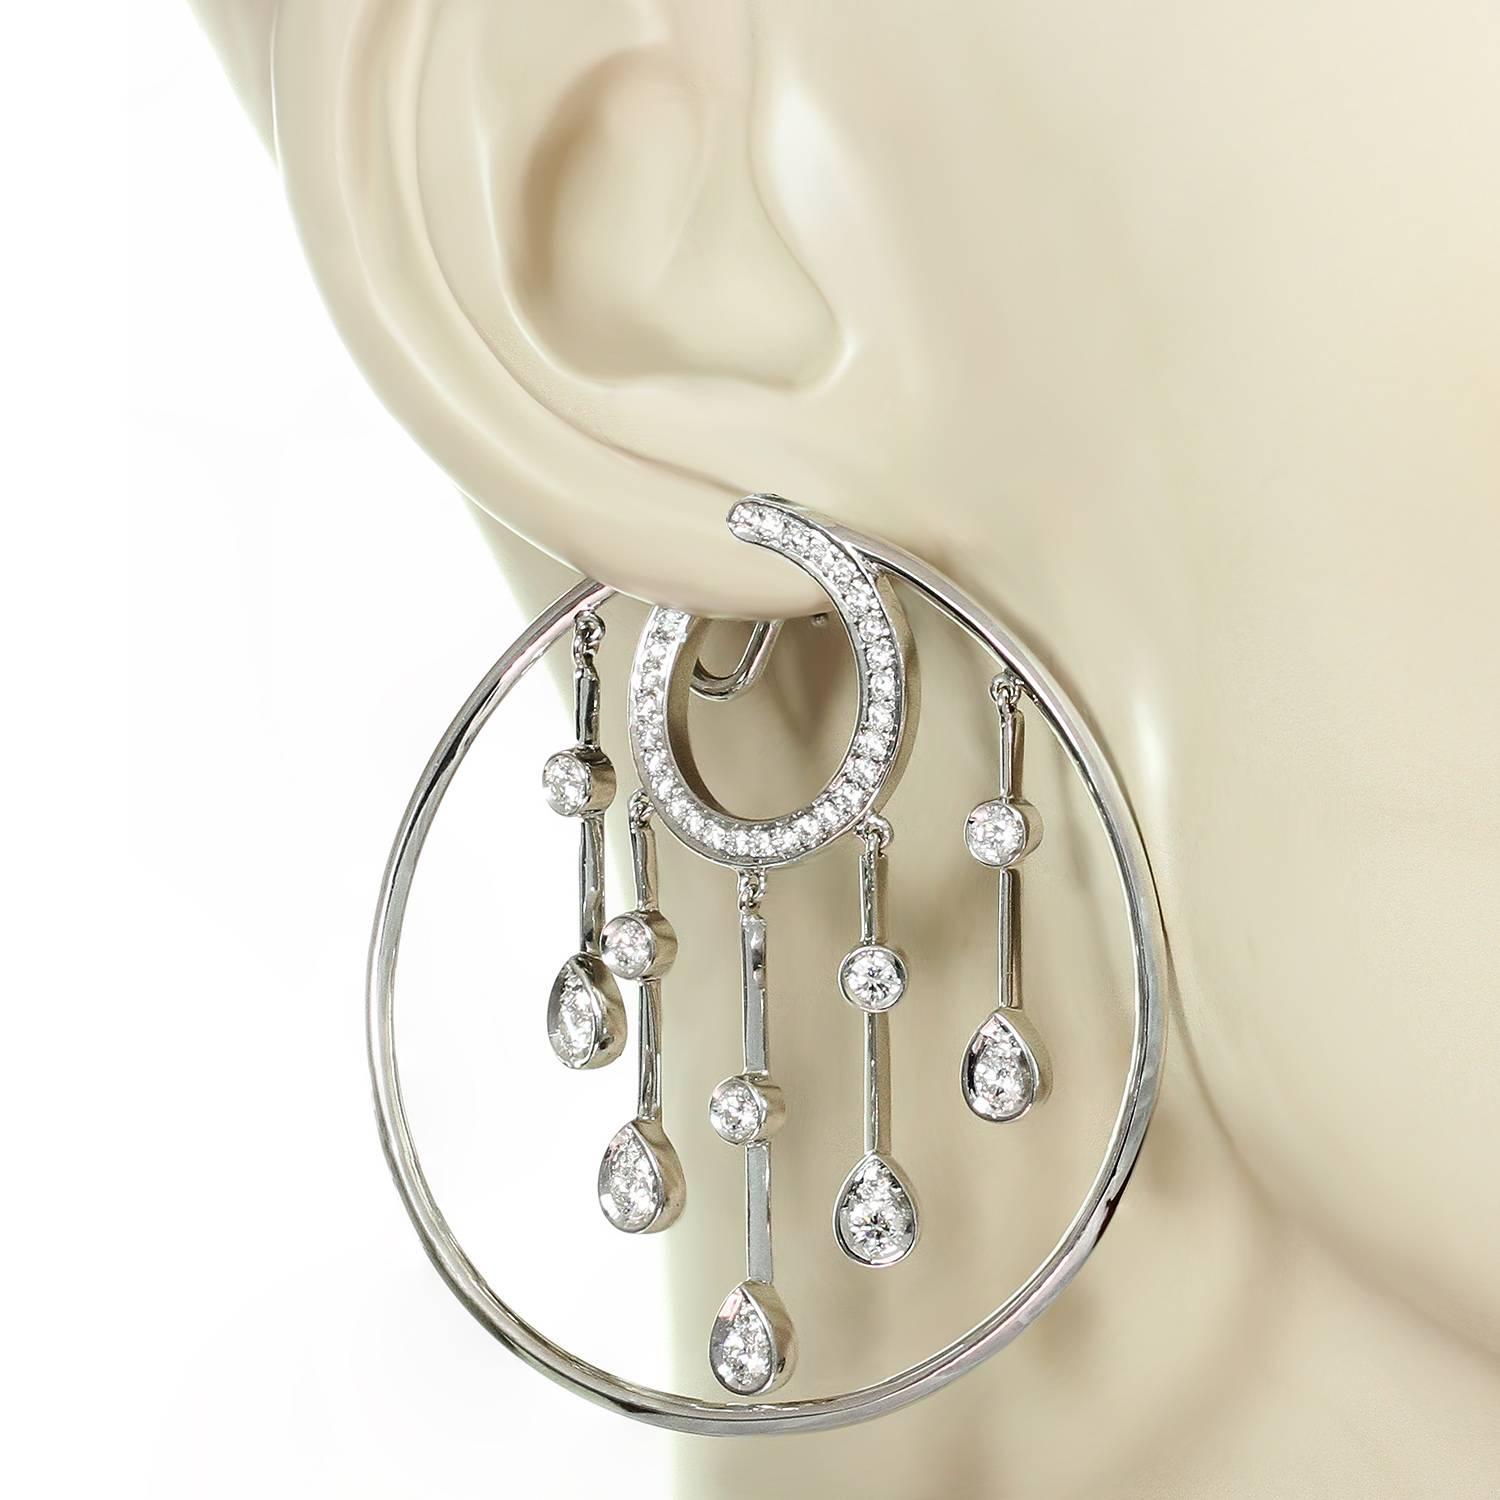 Chanel La Pluie Diamond White Gold Hoop Earrings In Excellent Condition For Sale In New York, NY